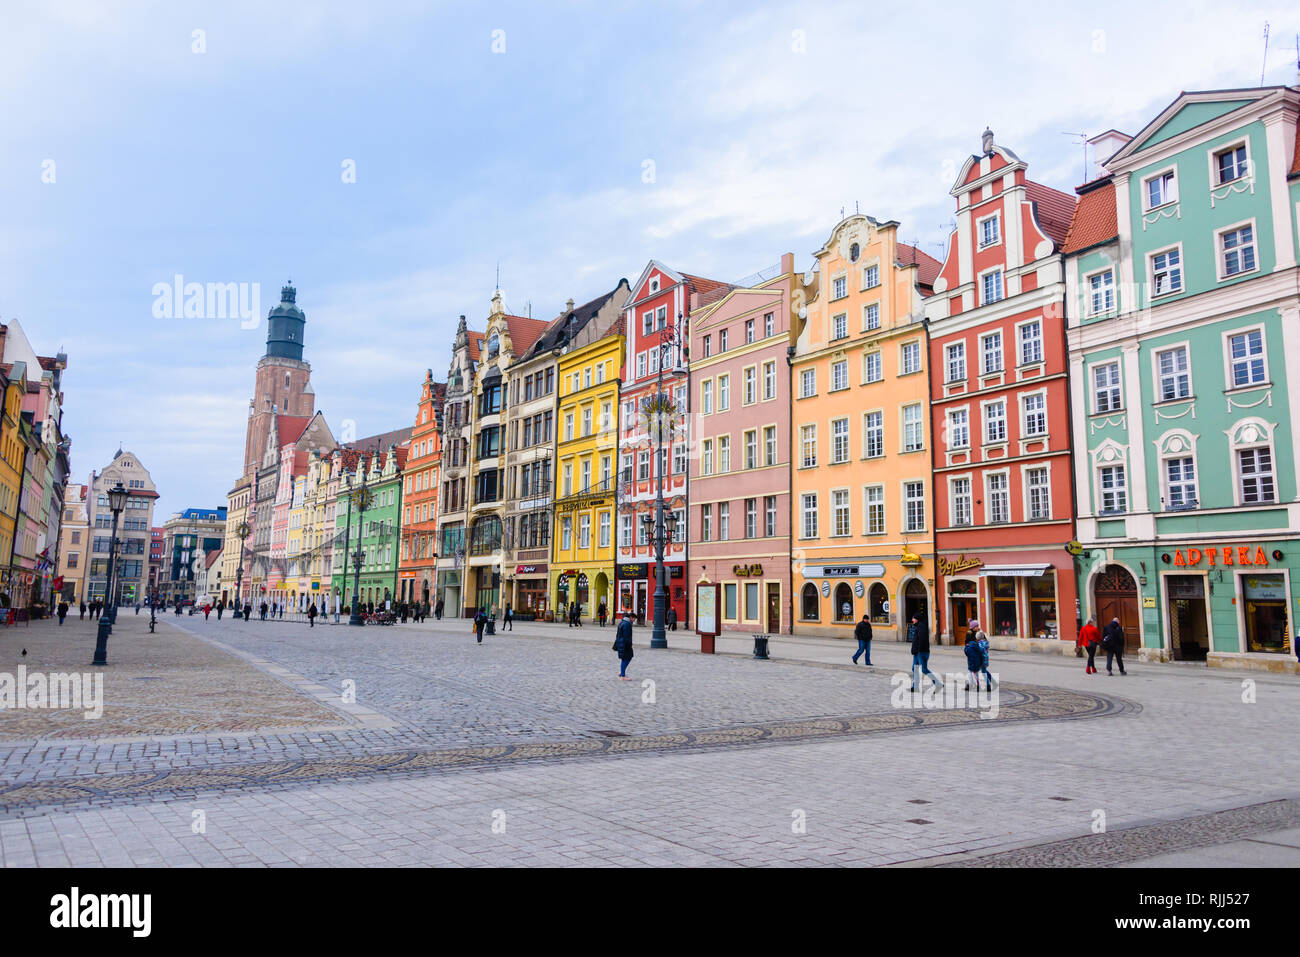 Colourful buildings within the town city square, Rynek, Wrocław, Wroclaw, Wroklaw, Poland Stock Photo